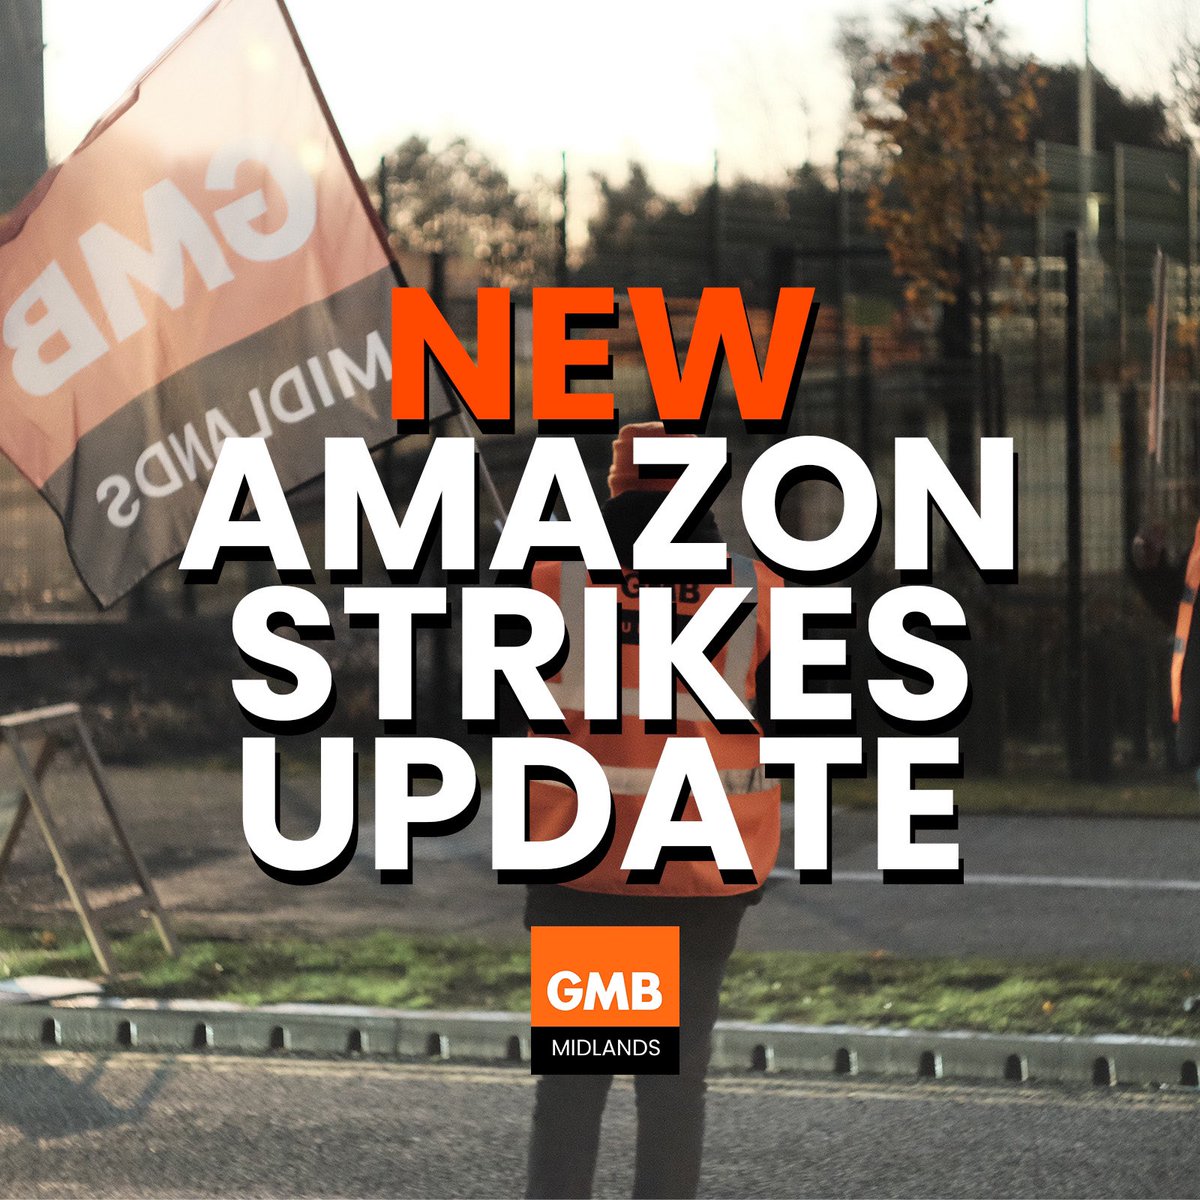 NEW: Amazon strikes are spreading. Workers at Amazon’s new flagship fulfilment centre near Birmingham have voted to join strike action, just weeks after opening. More: gmb.org.uk/news/amazon-st…